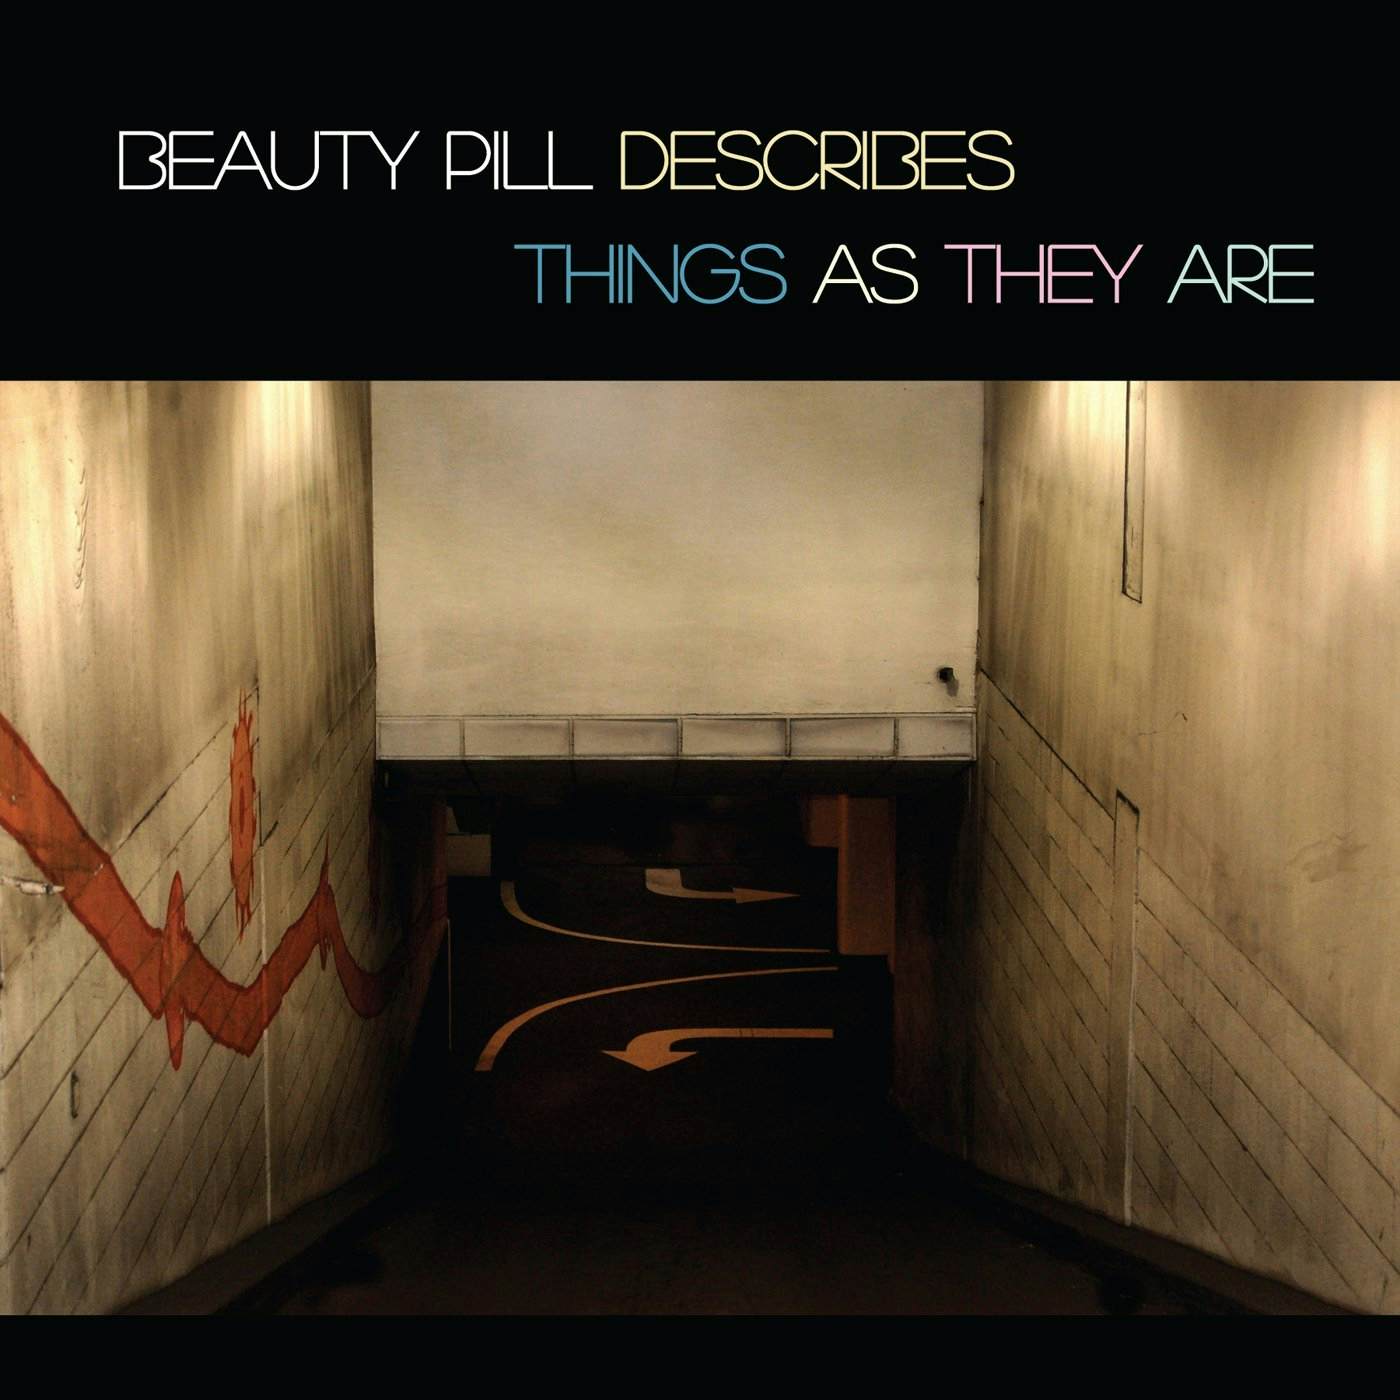 BEAUTY PILL DESCRIBES THINGS AS THEY ARE CD